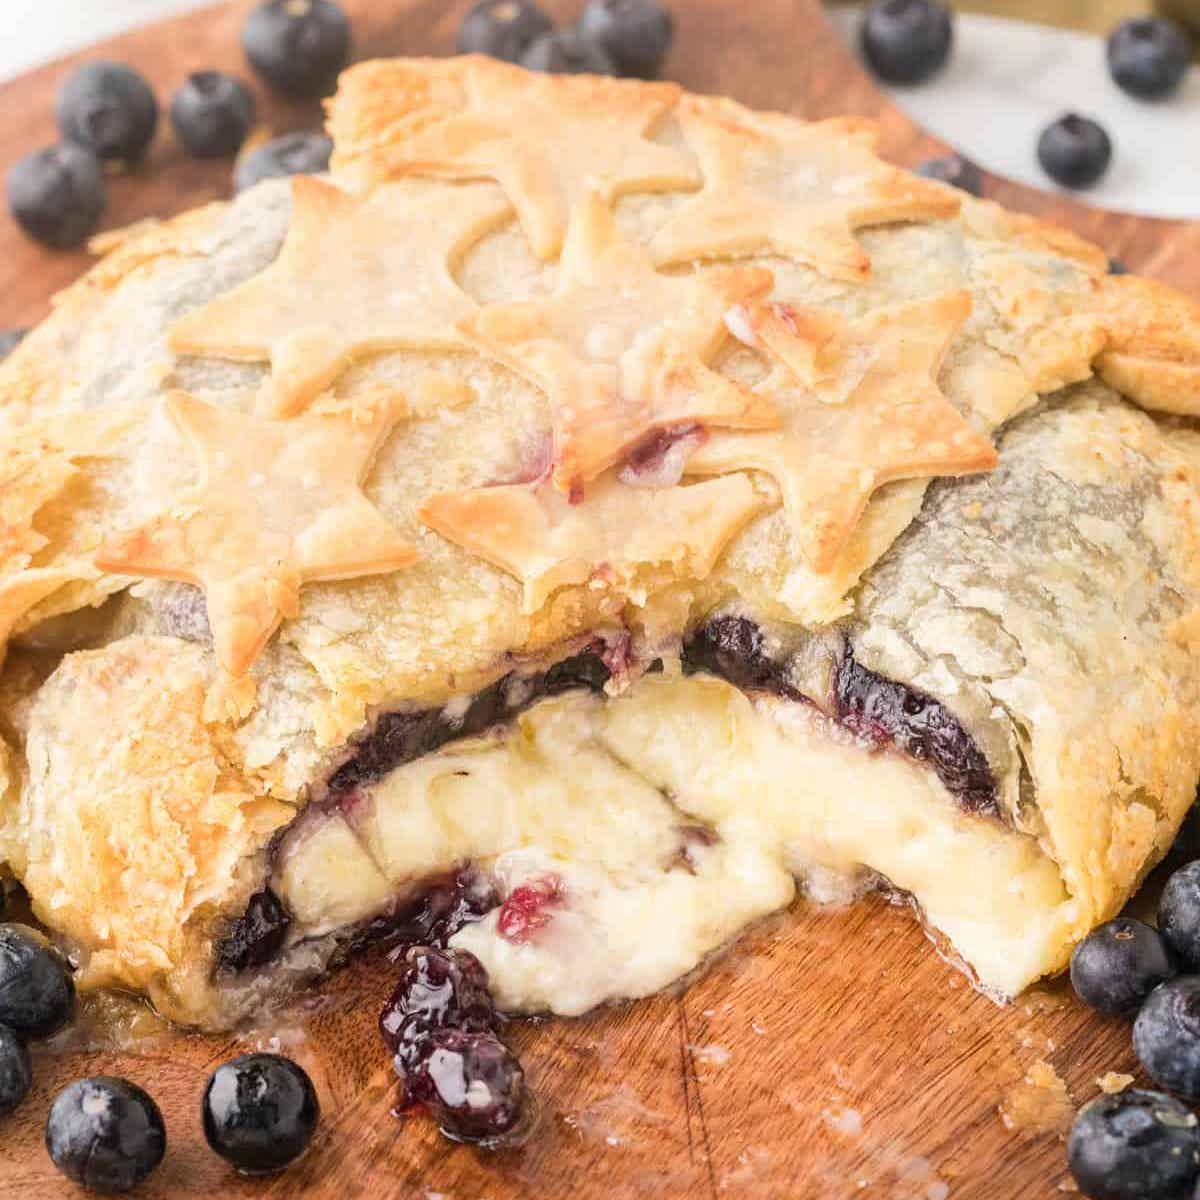 Melty brie topped with blueberry pie filling, oozing out of a puff pastry crust onto a wooden board, with blueberries in the background.